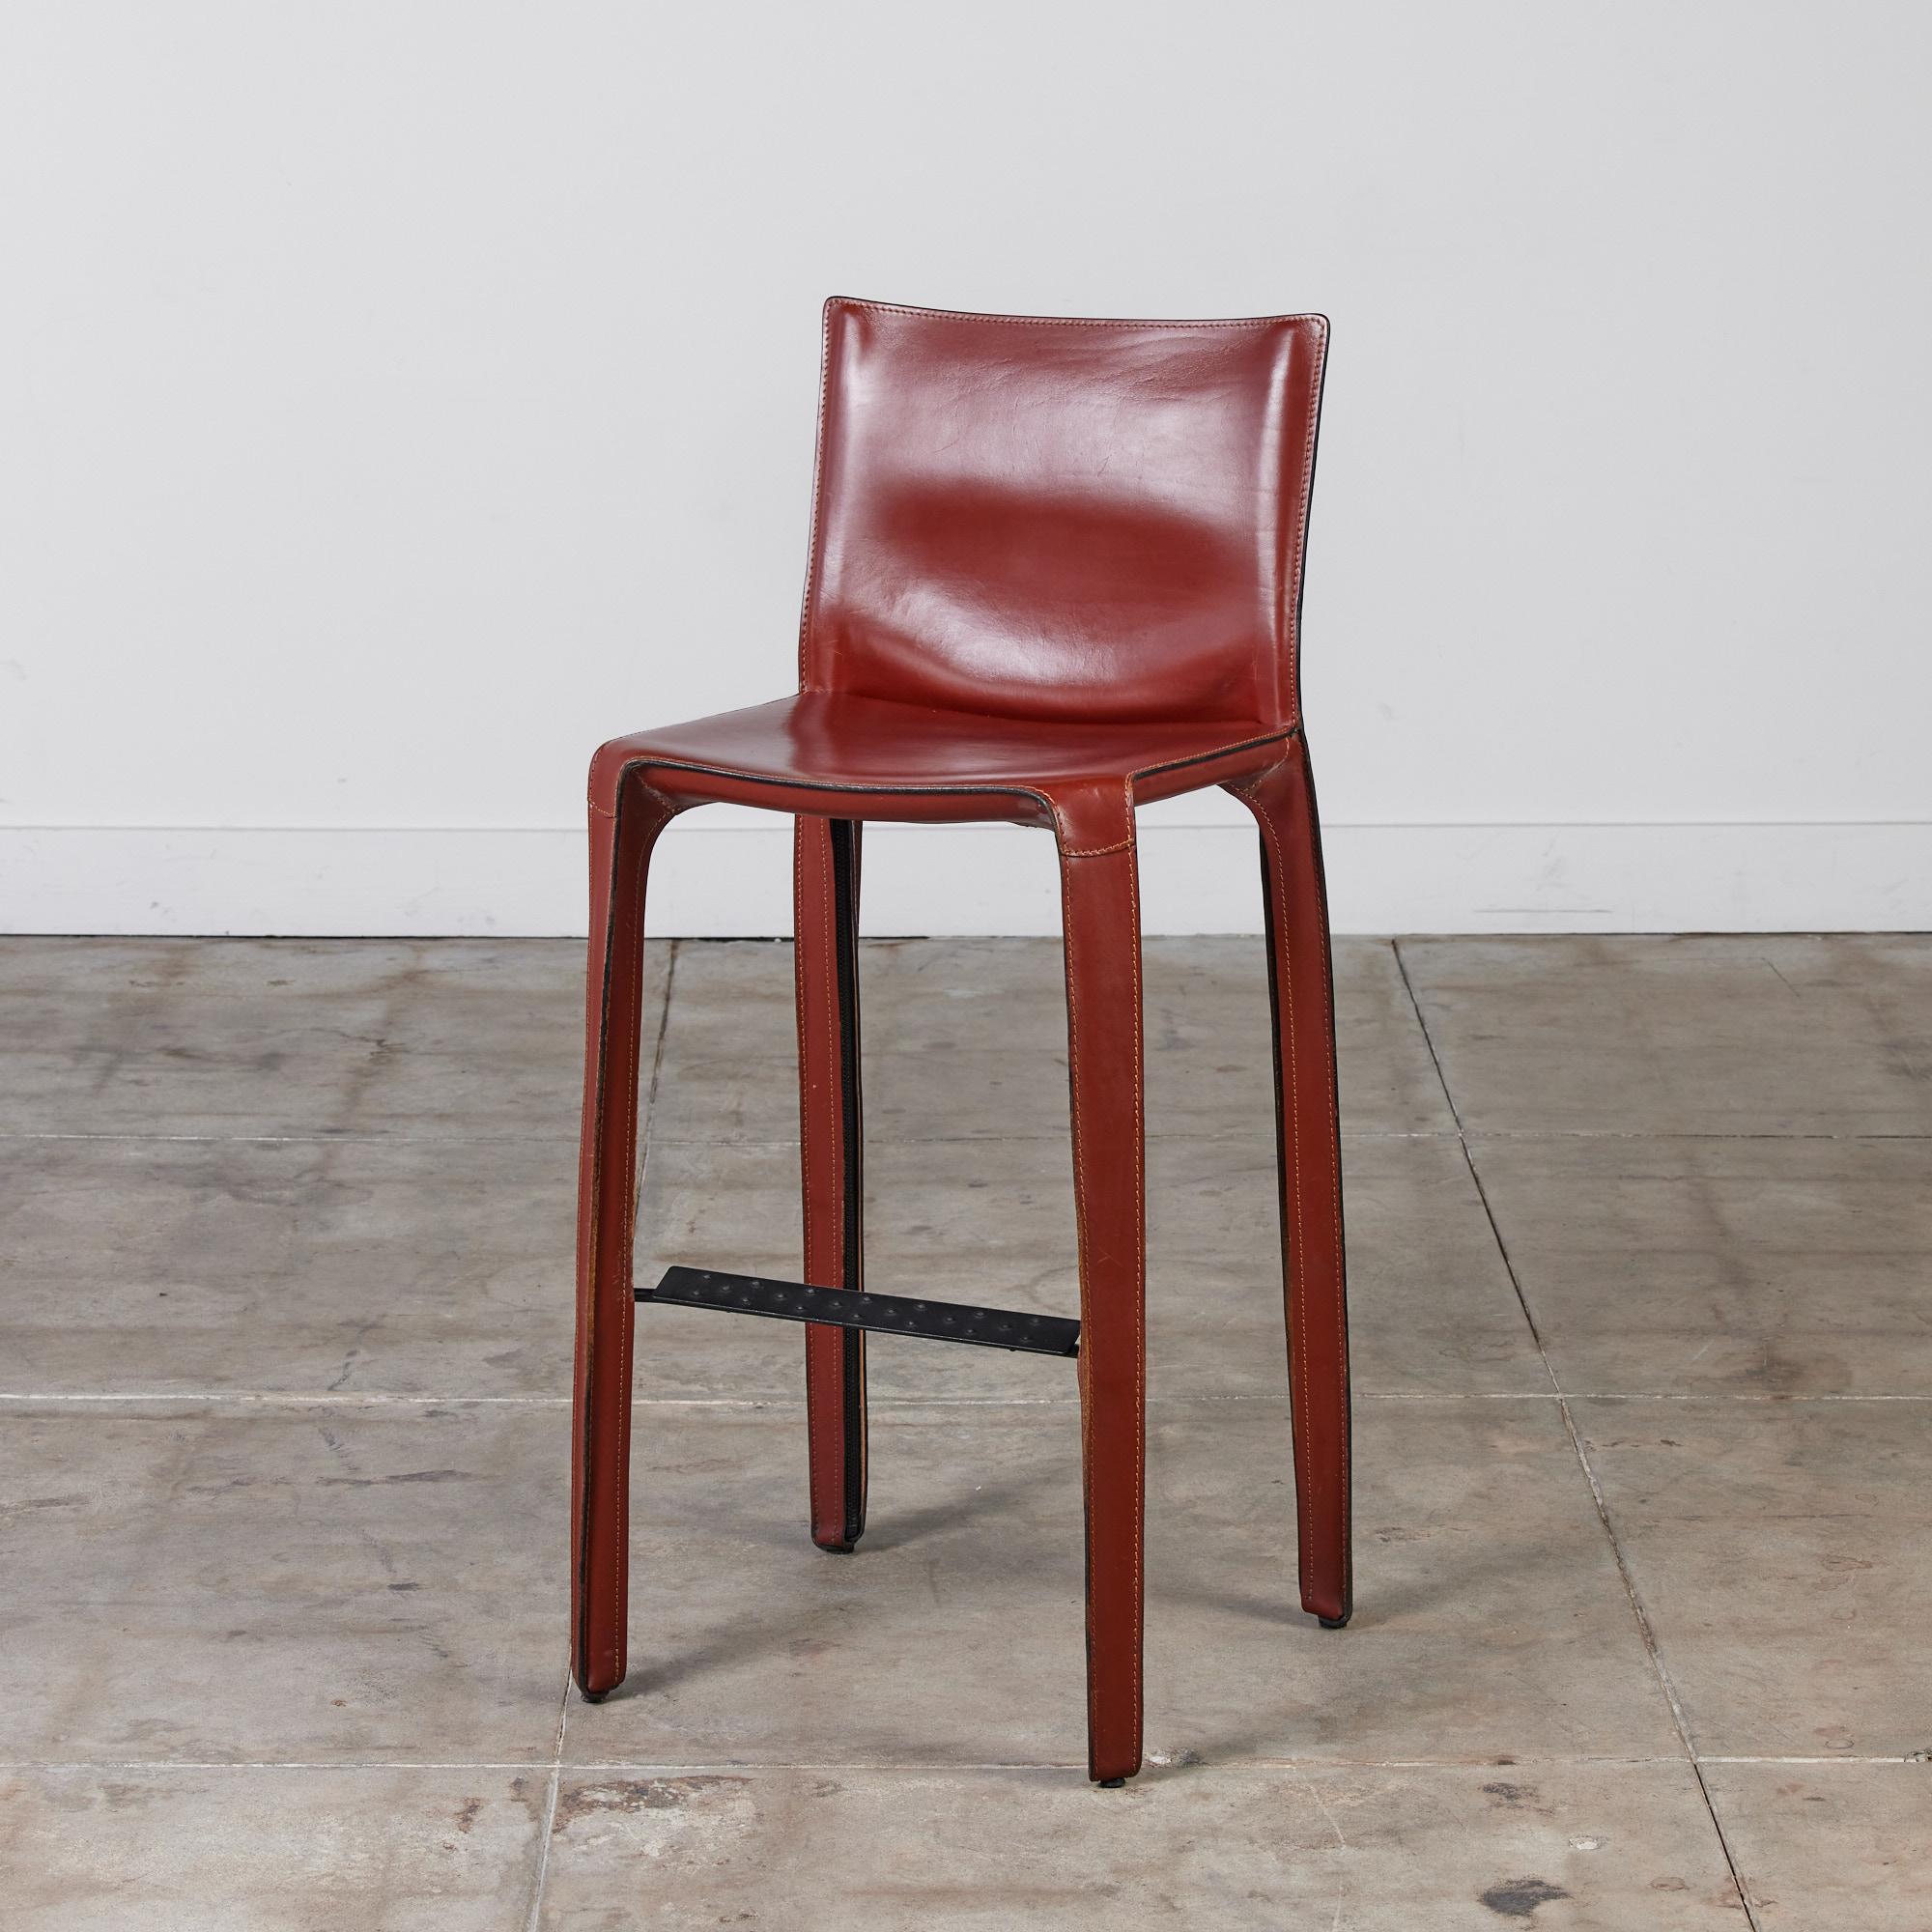 This iconic design by Mario Bellini for Cassina c.1970s, Italy, features the original deep red saddle leather which is wrapped atop a steel frame. The back legs feature a black zippered detail. A black textured footrest runs along the front of the